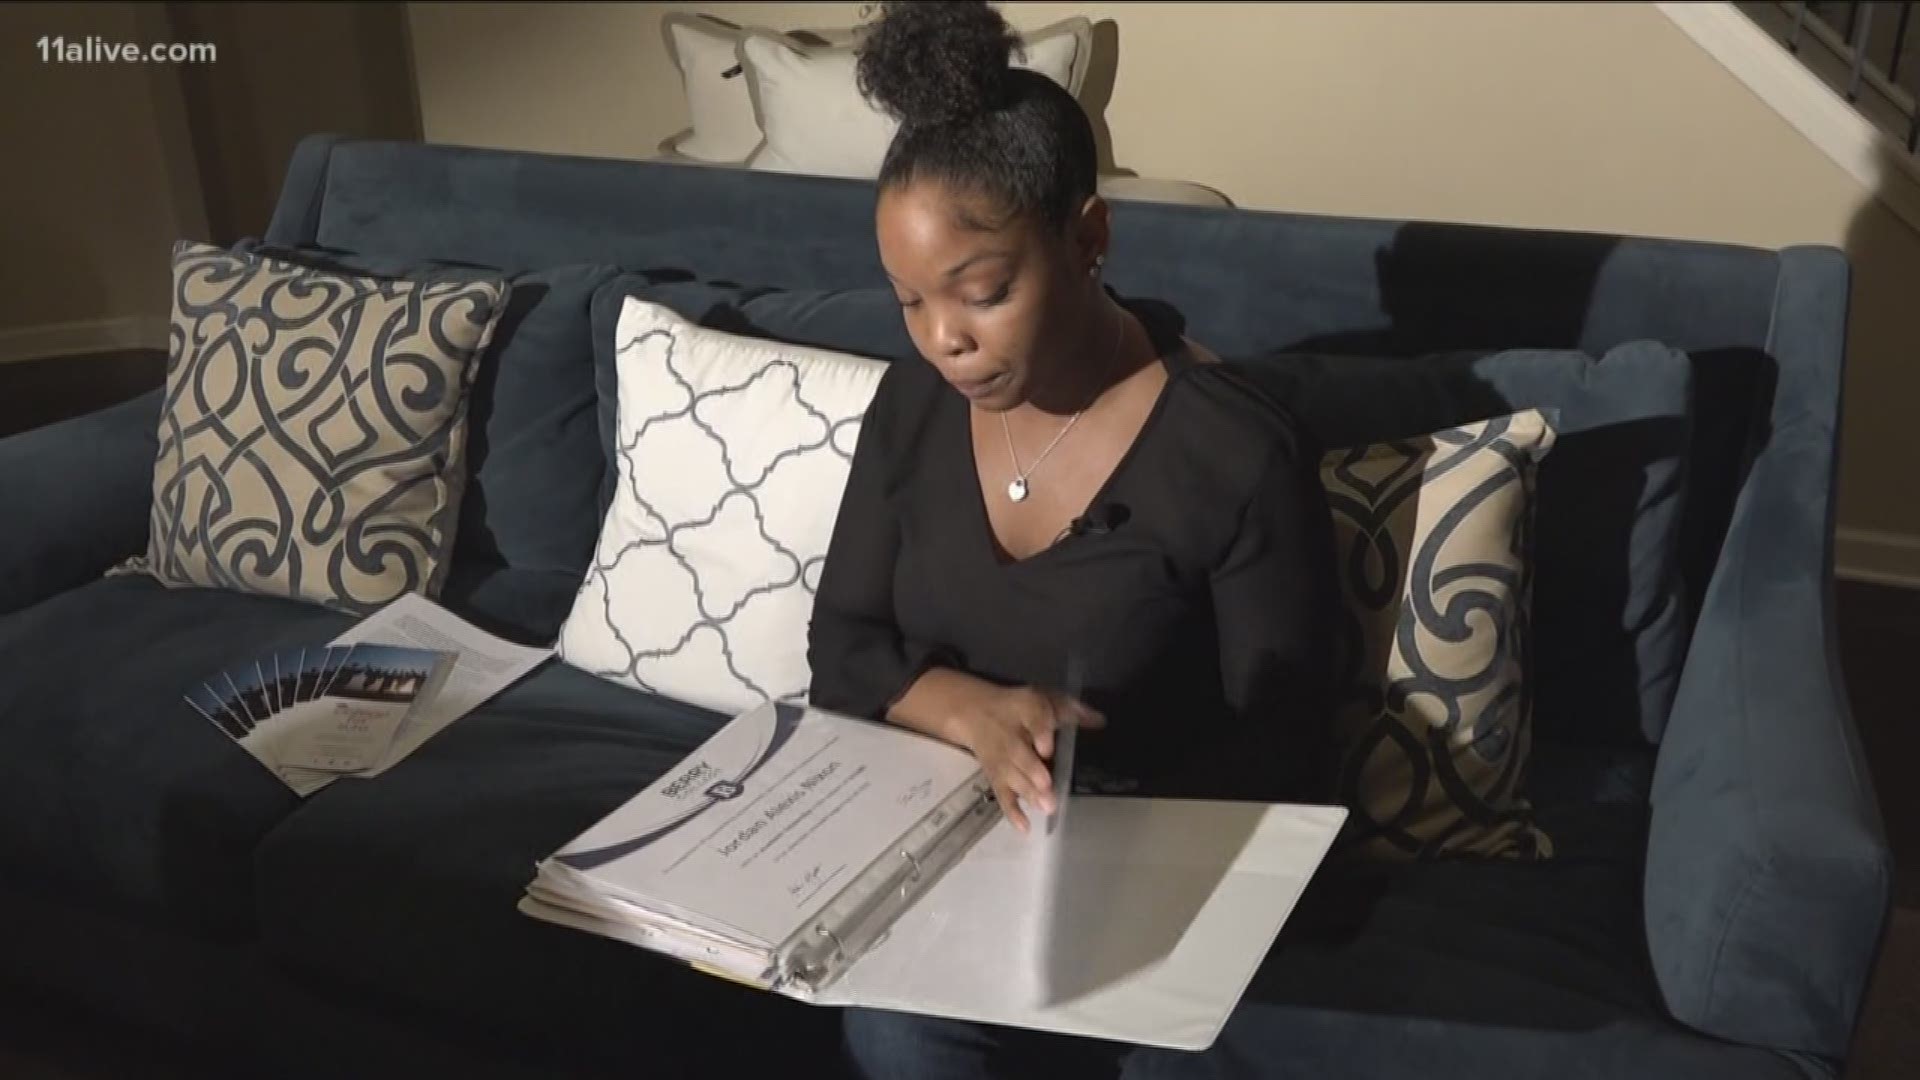 A Georgia high school senior has been accepted into 39 colleges - and is still waiting to hear back from more. So far, Jordan Nixon has racked up $1.6 million dollars in scholarship money.